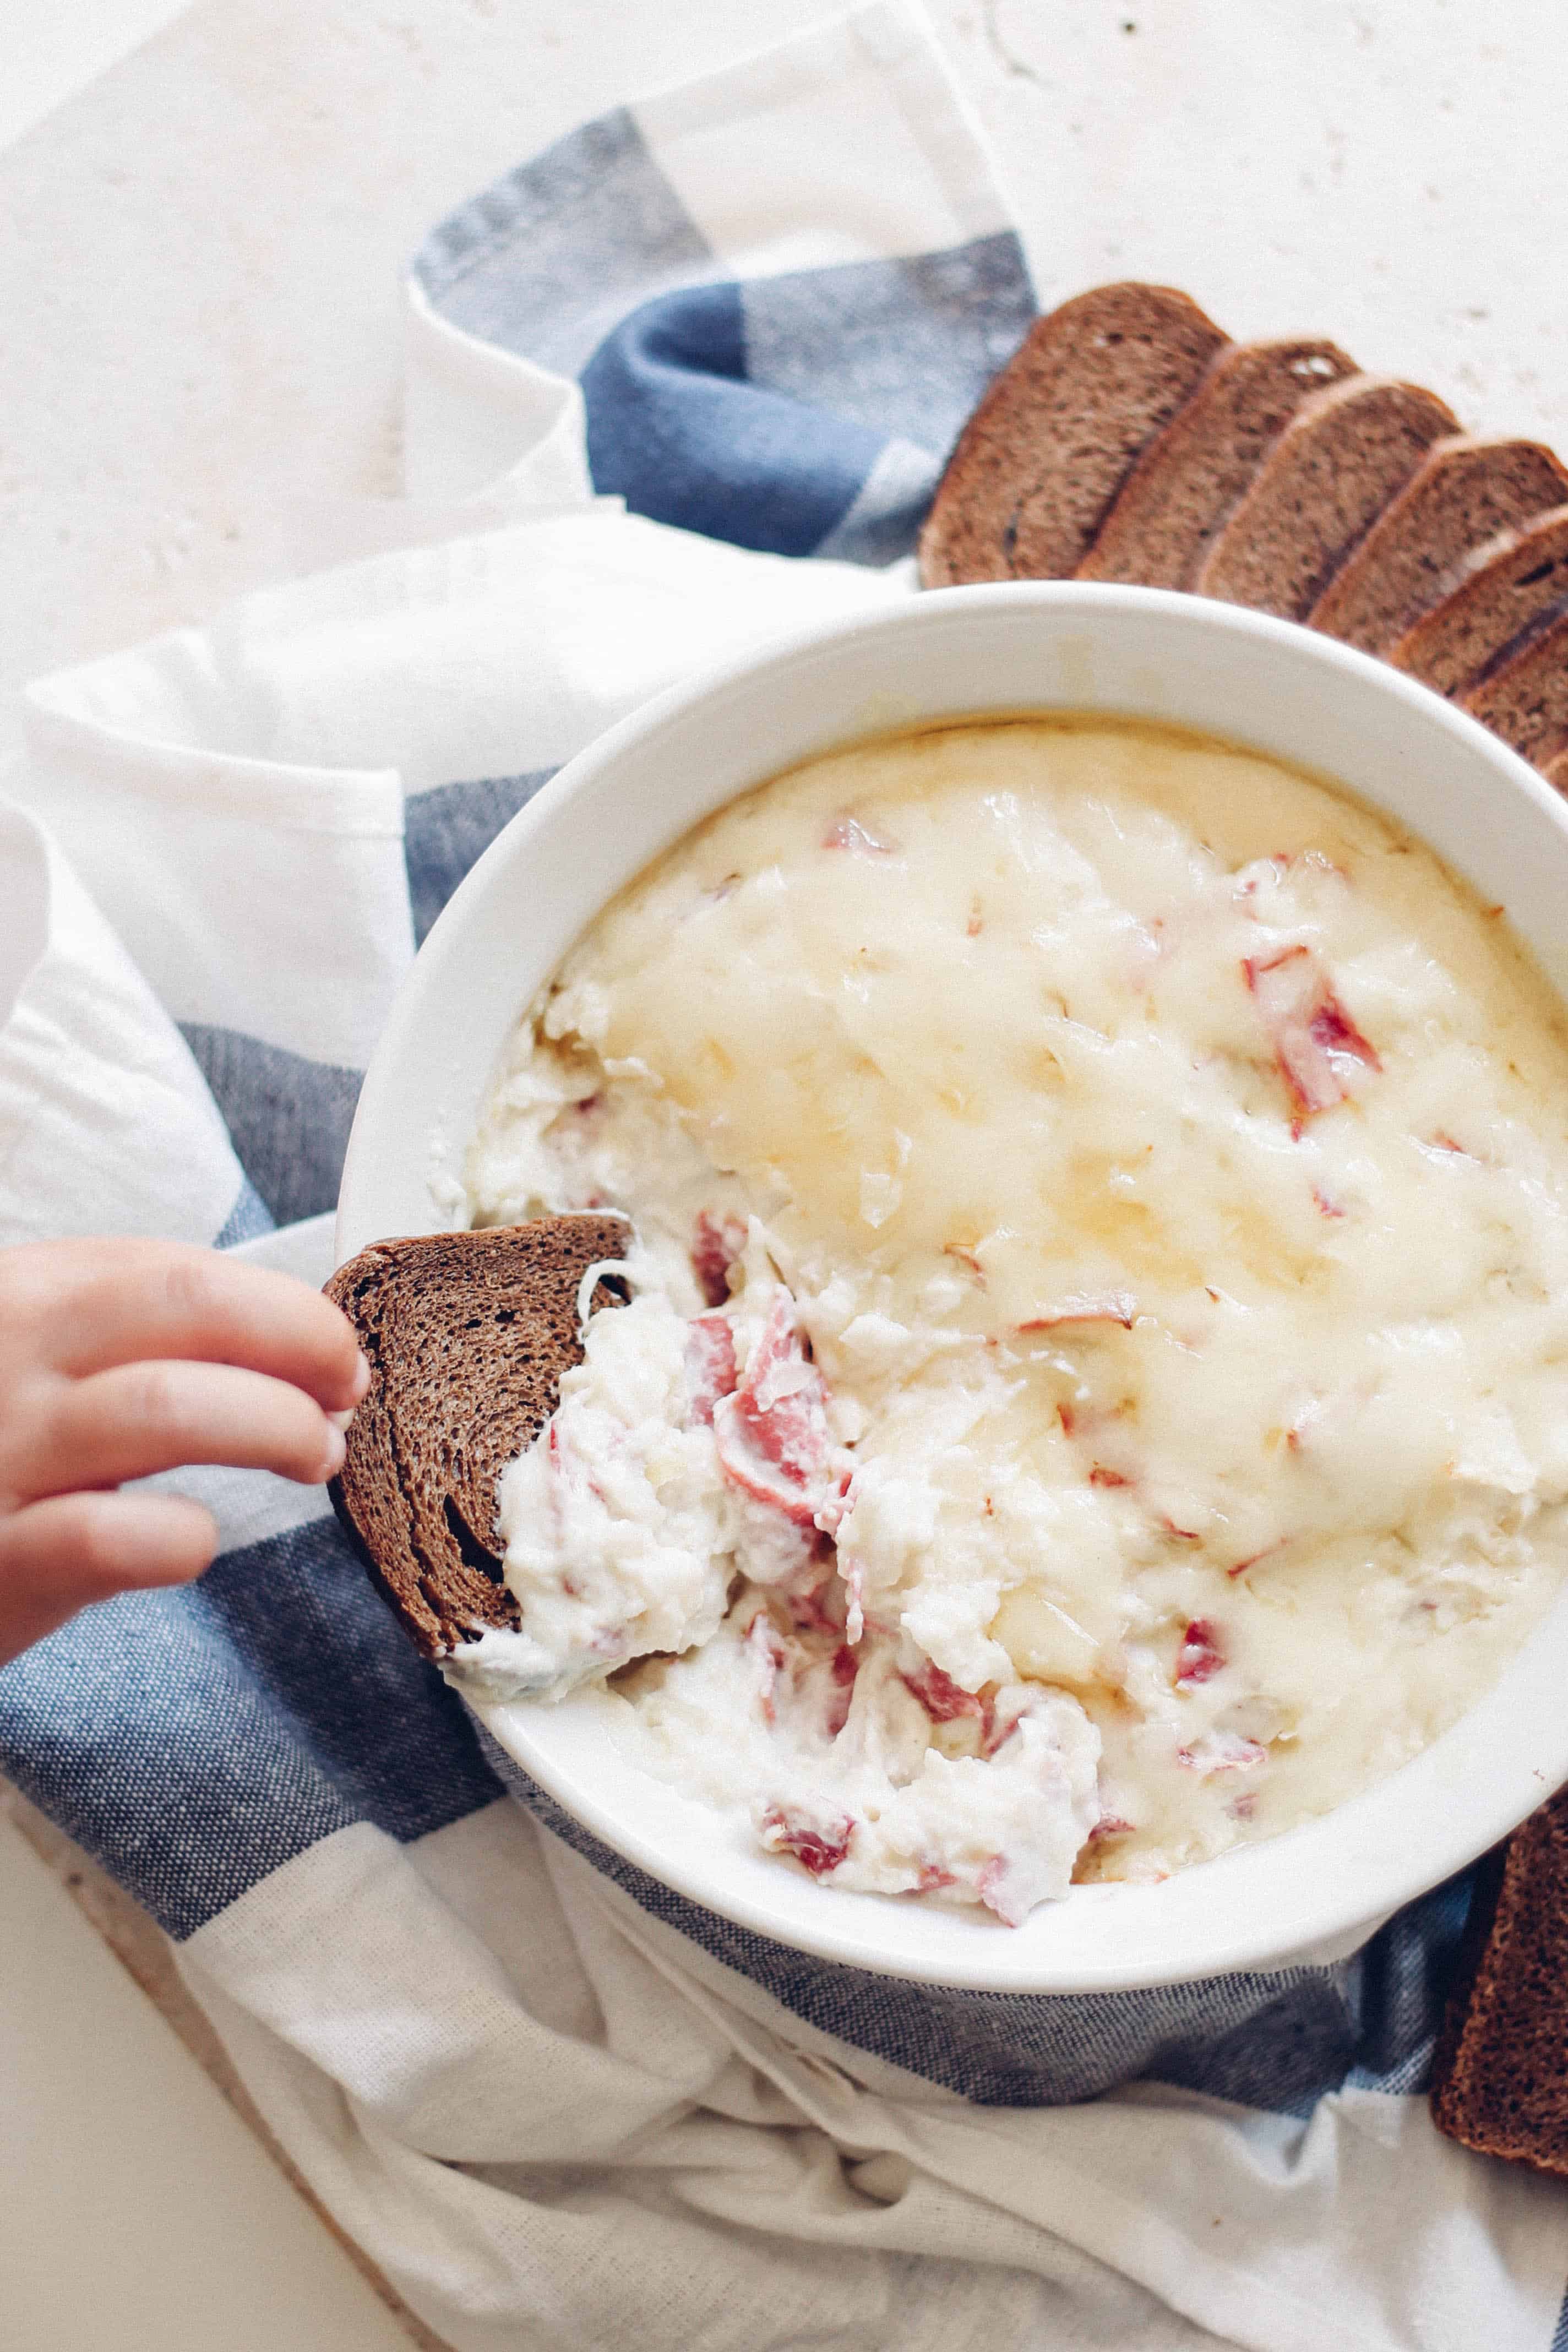 Lightened Up Reuben Dip | Destination Delish - A rich and creamy reuben dip made lighter with cauliflower and light cream cheese. Enjoy with pita chips, rye bread, or veggies! 